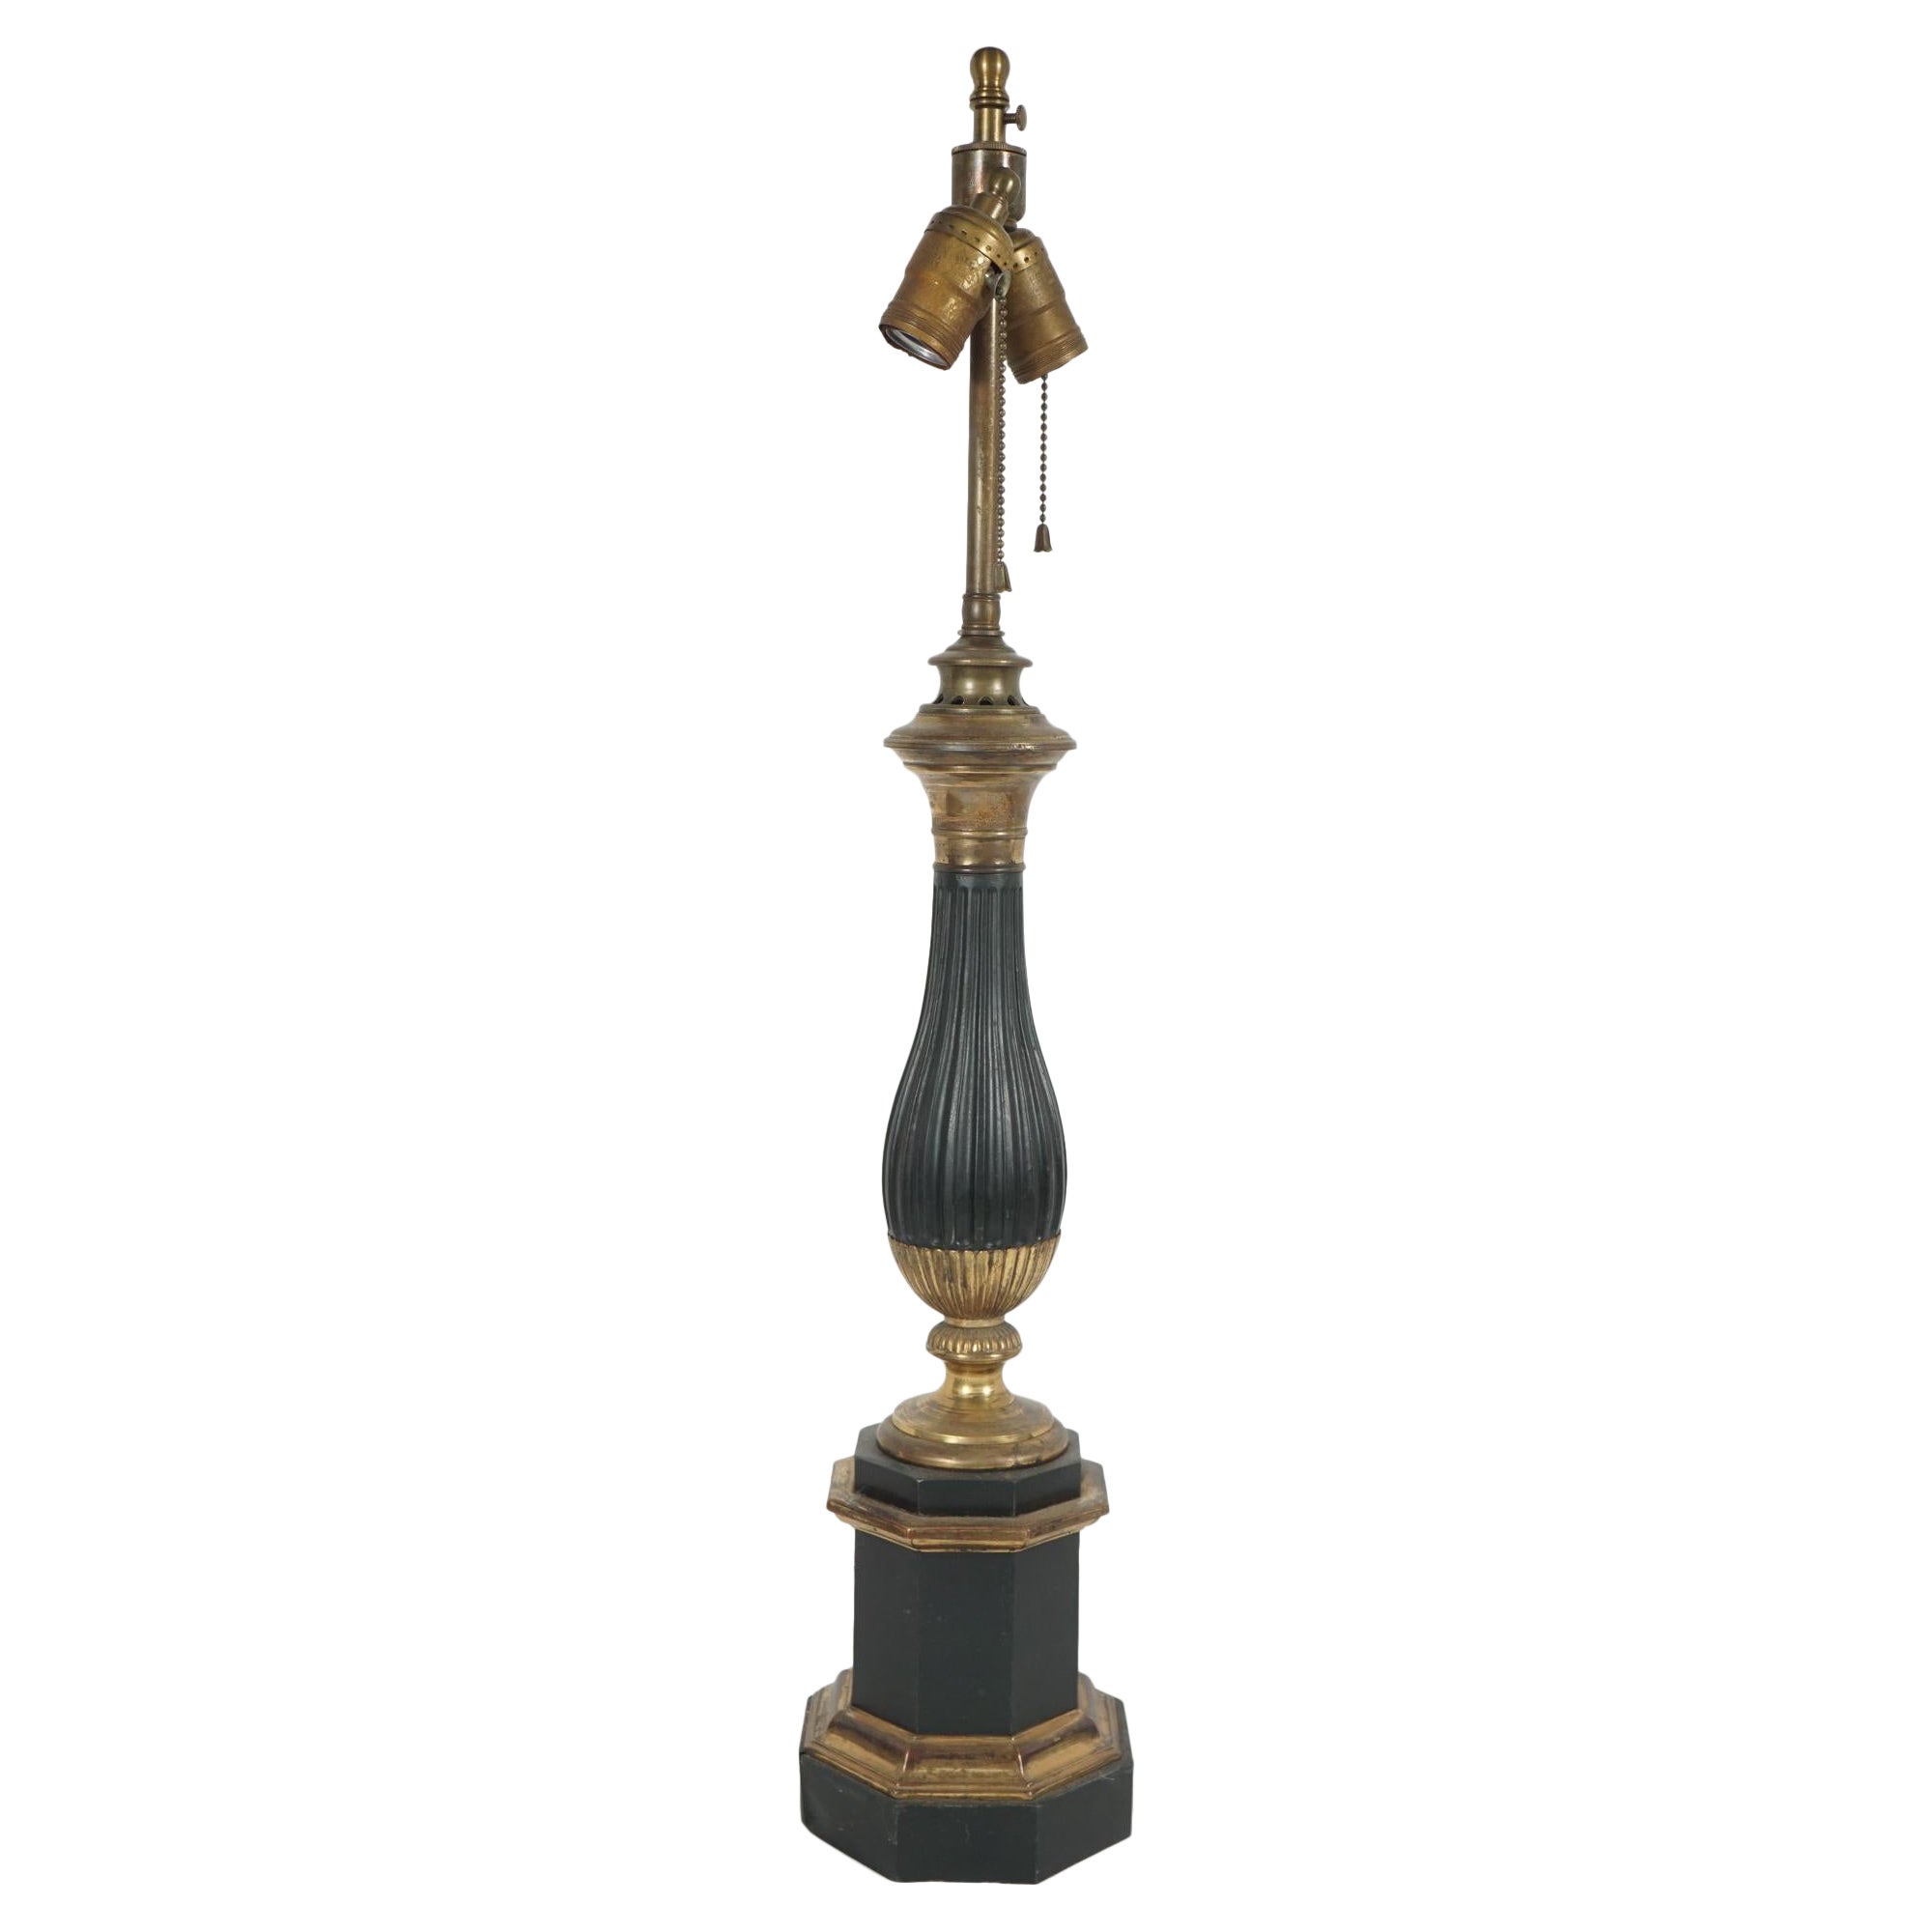 French 19th Century Tole Sinumbra or Carcel Lamp from the Estate of Bunny Mellon